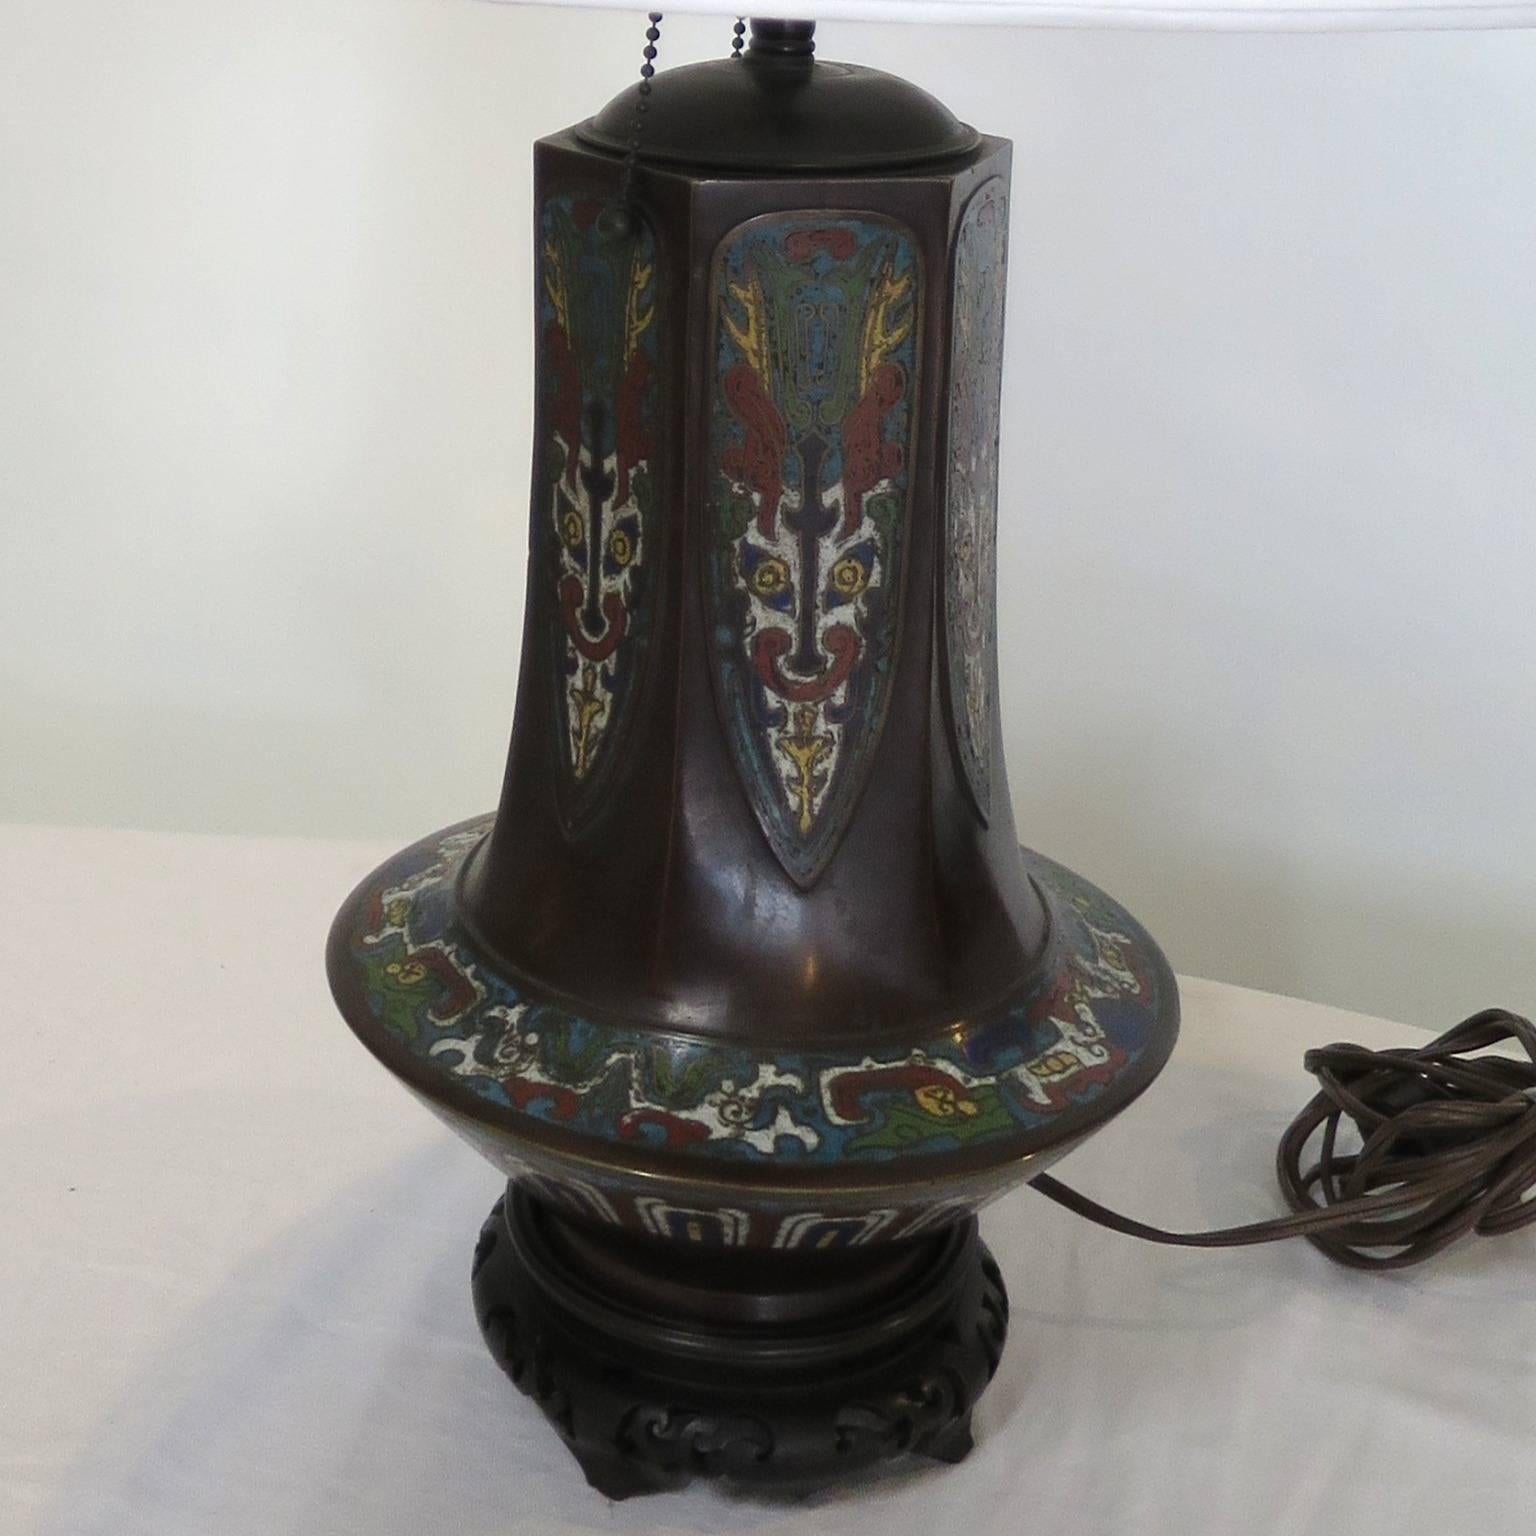 Chinese Export Chinese Cloisonné Enamel Bronze Vase 19th Century Mounted as a Table Lamp For Sale